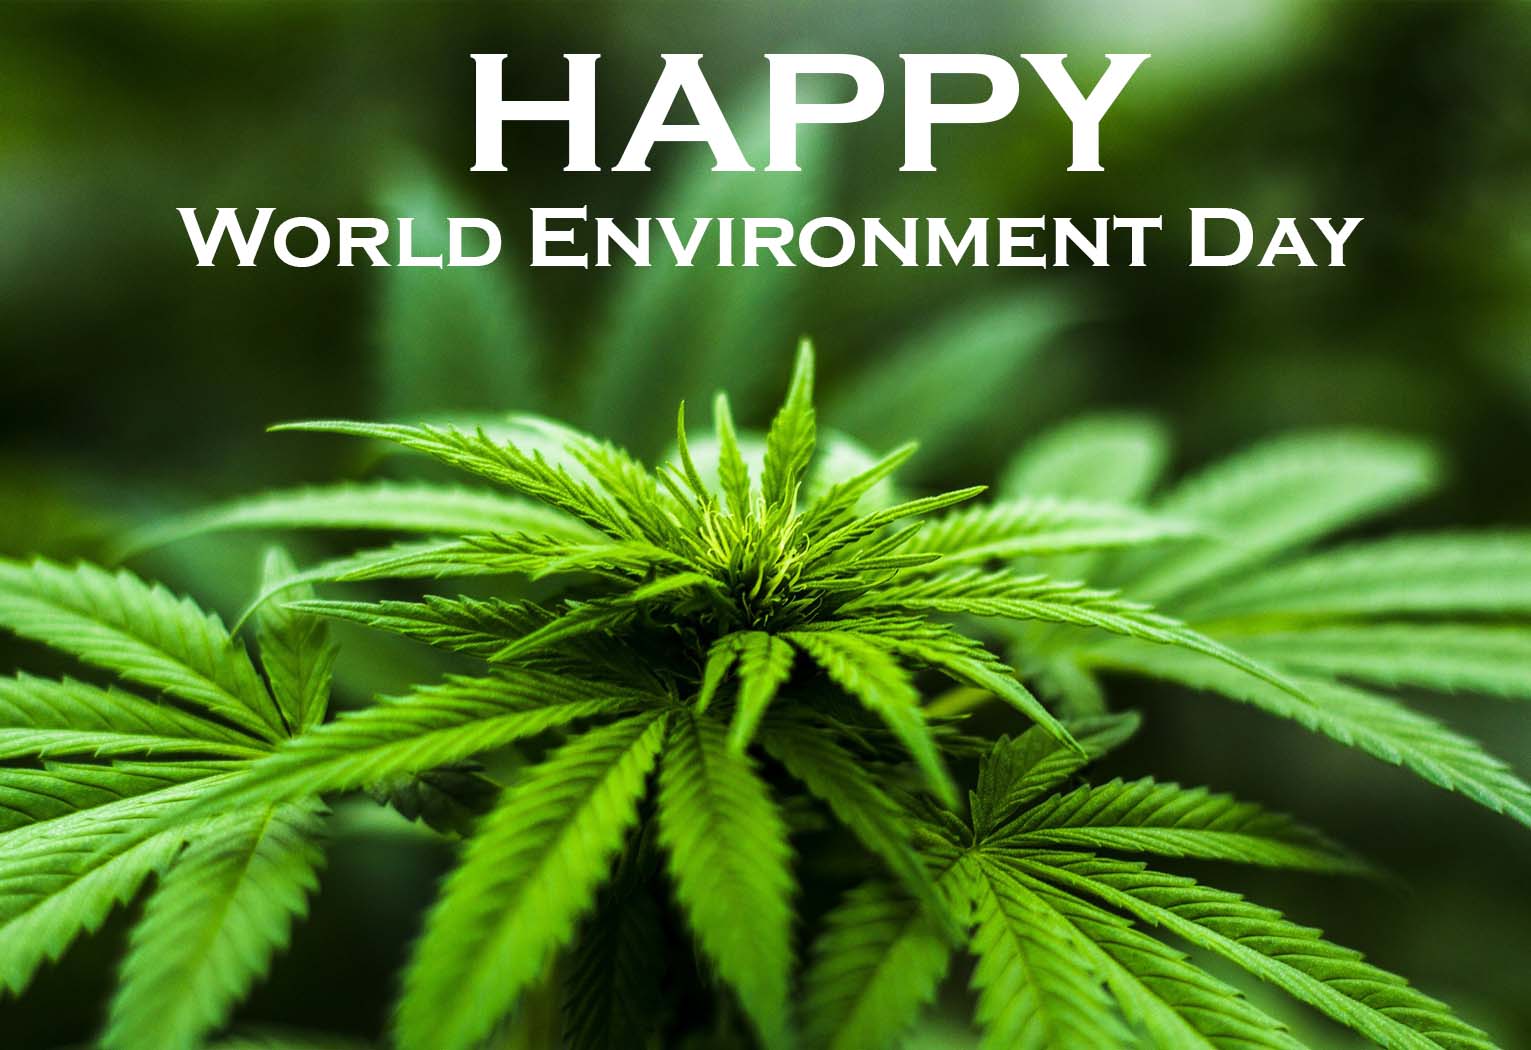 Happy World Environment Day 2022 Images